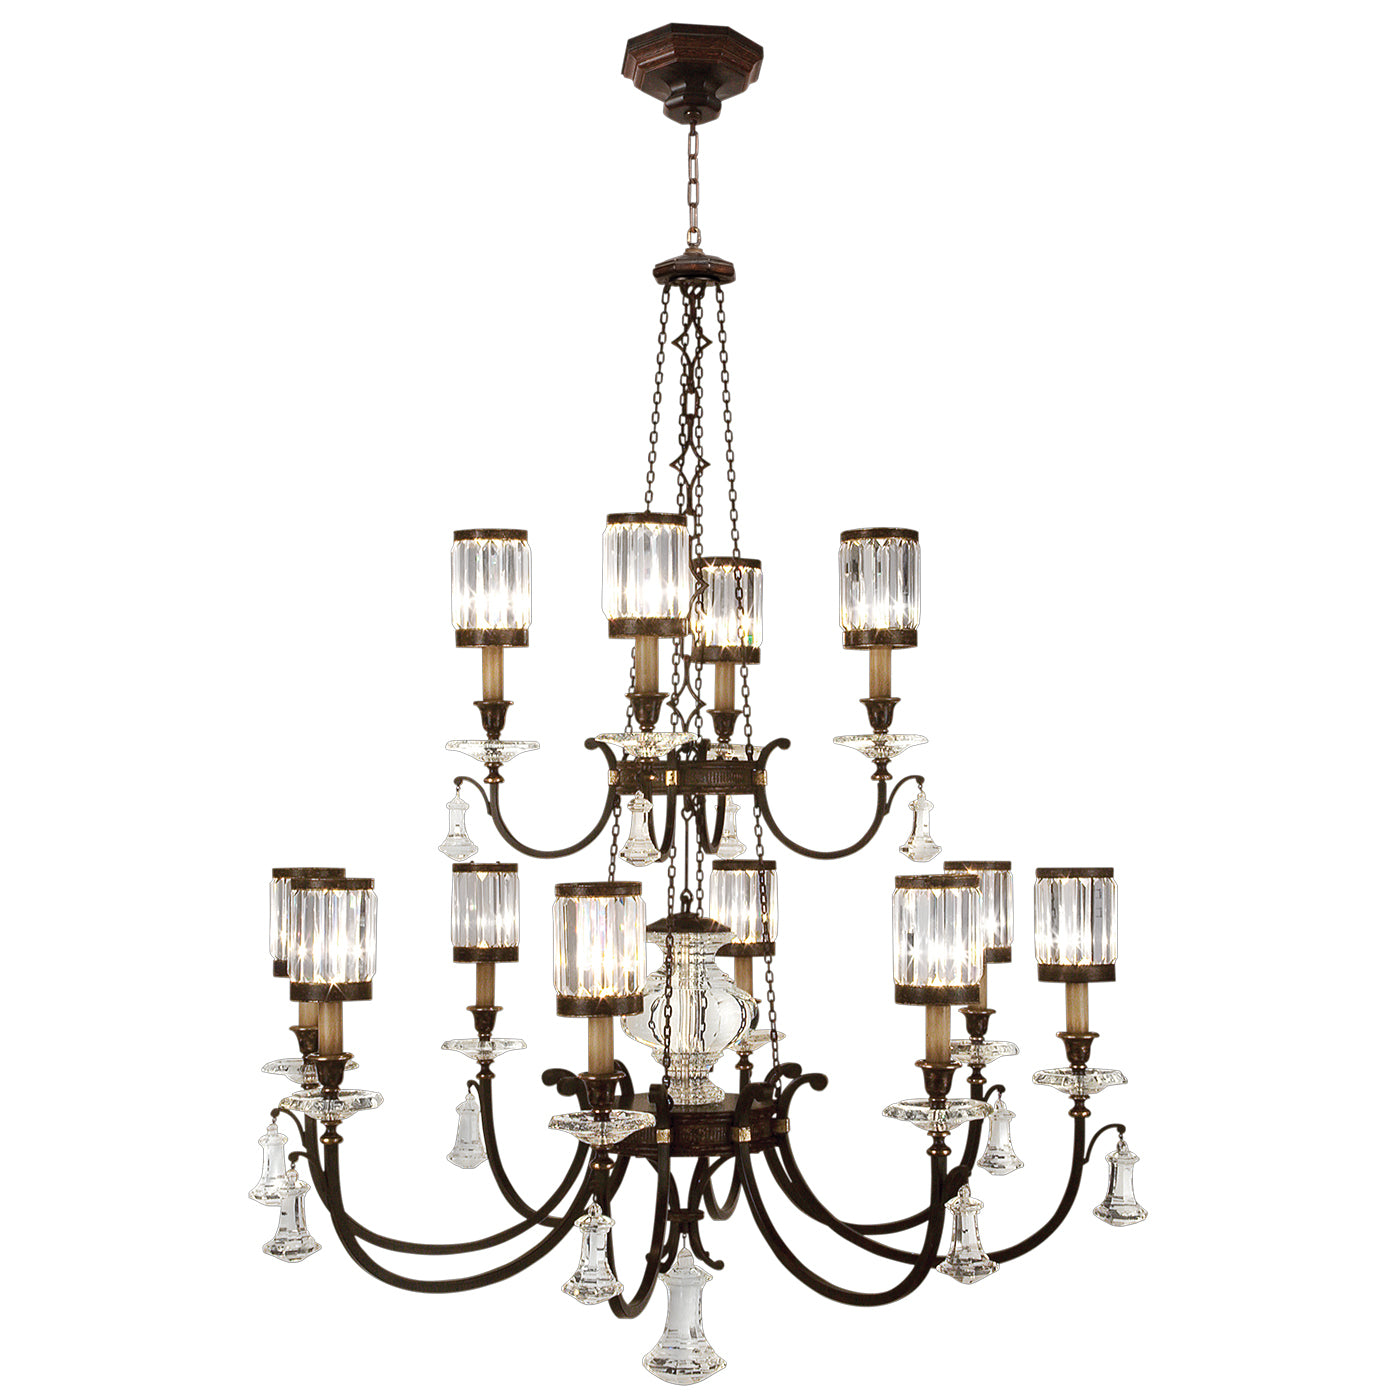 Fine Art Handcrafted Lighting Eaton Place Chandelier Chandeliers Fine Art Handcrafted Lighting Bronze 53 x 69 